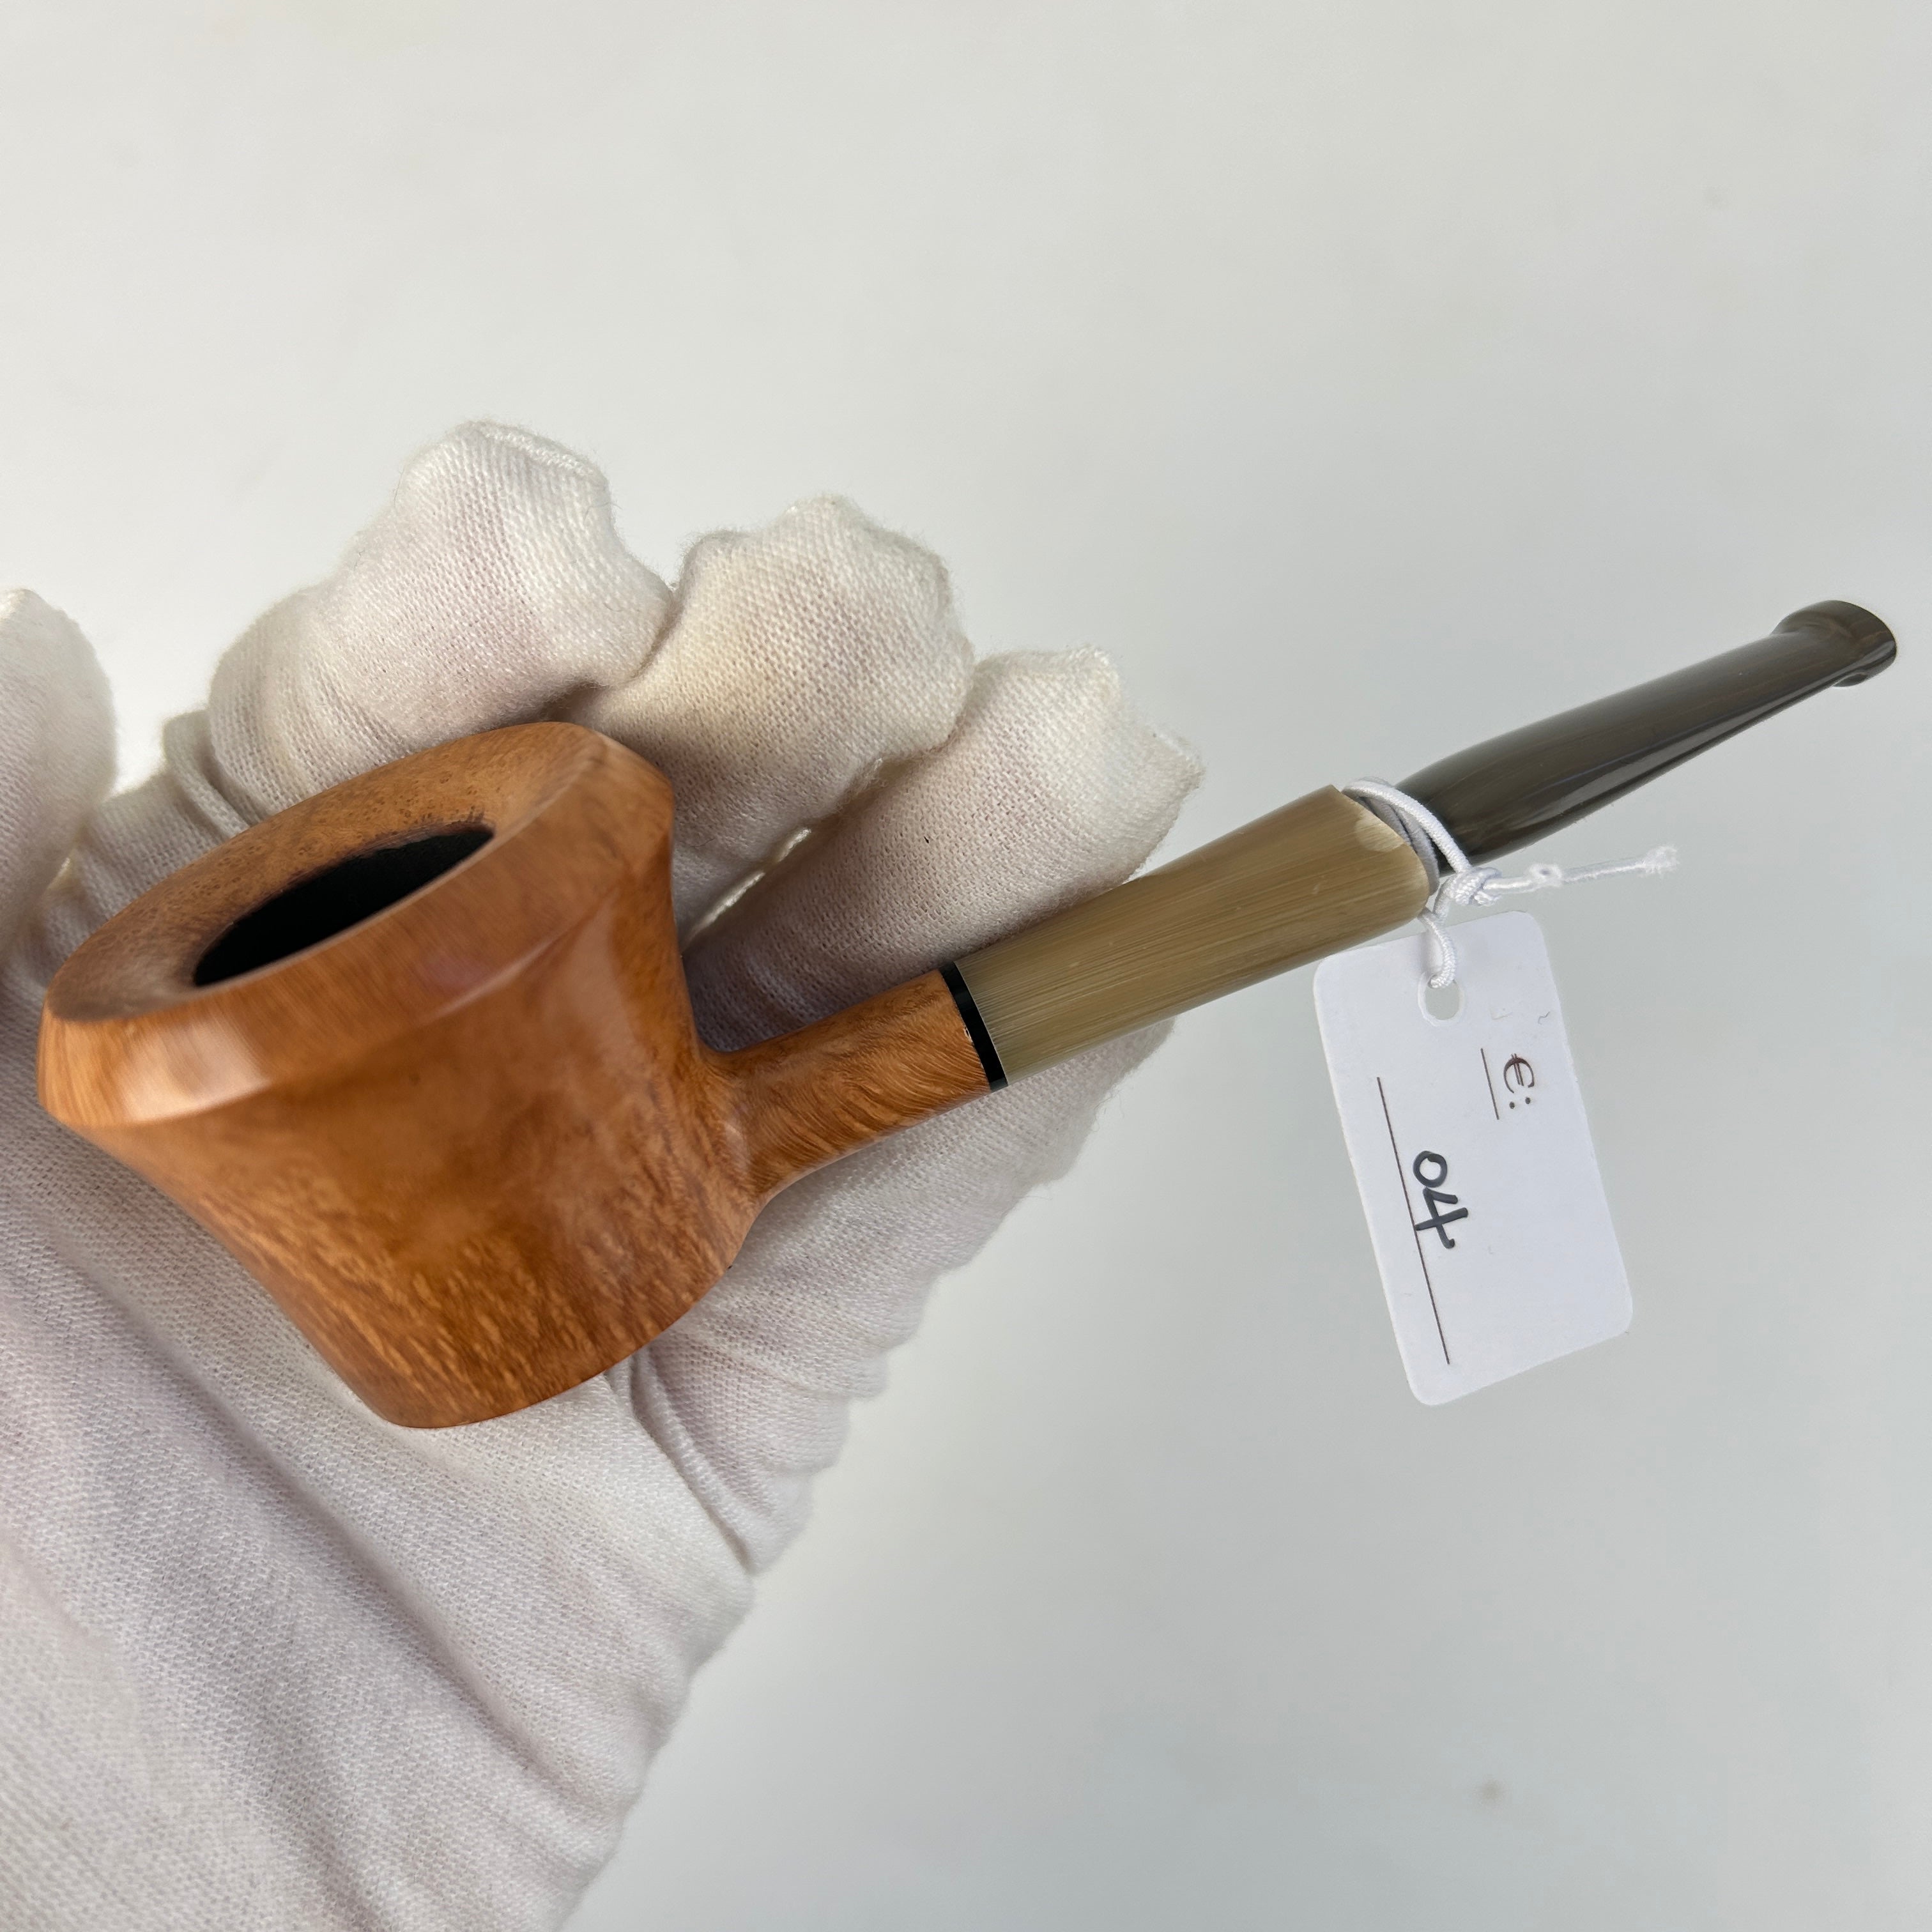 IDEA PIPES Handmade Briar Wood Tobacco Pipes Smooth Finished pot Shape with Ebonite Stem